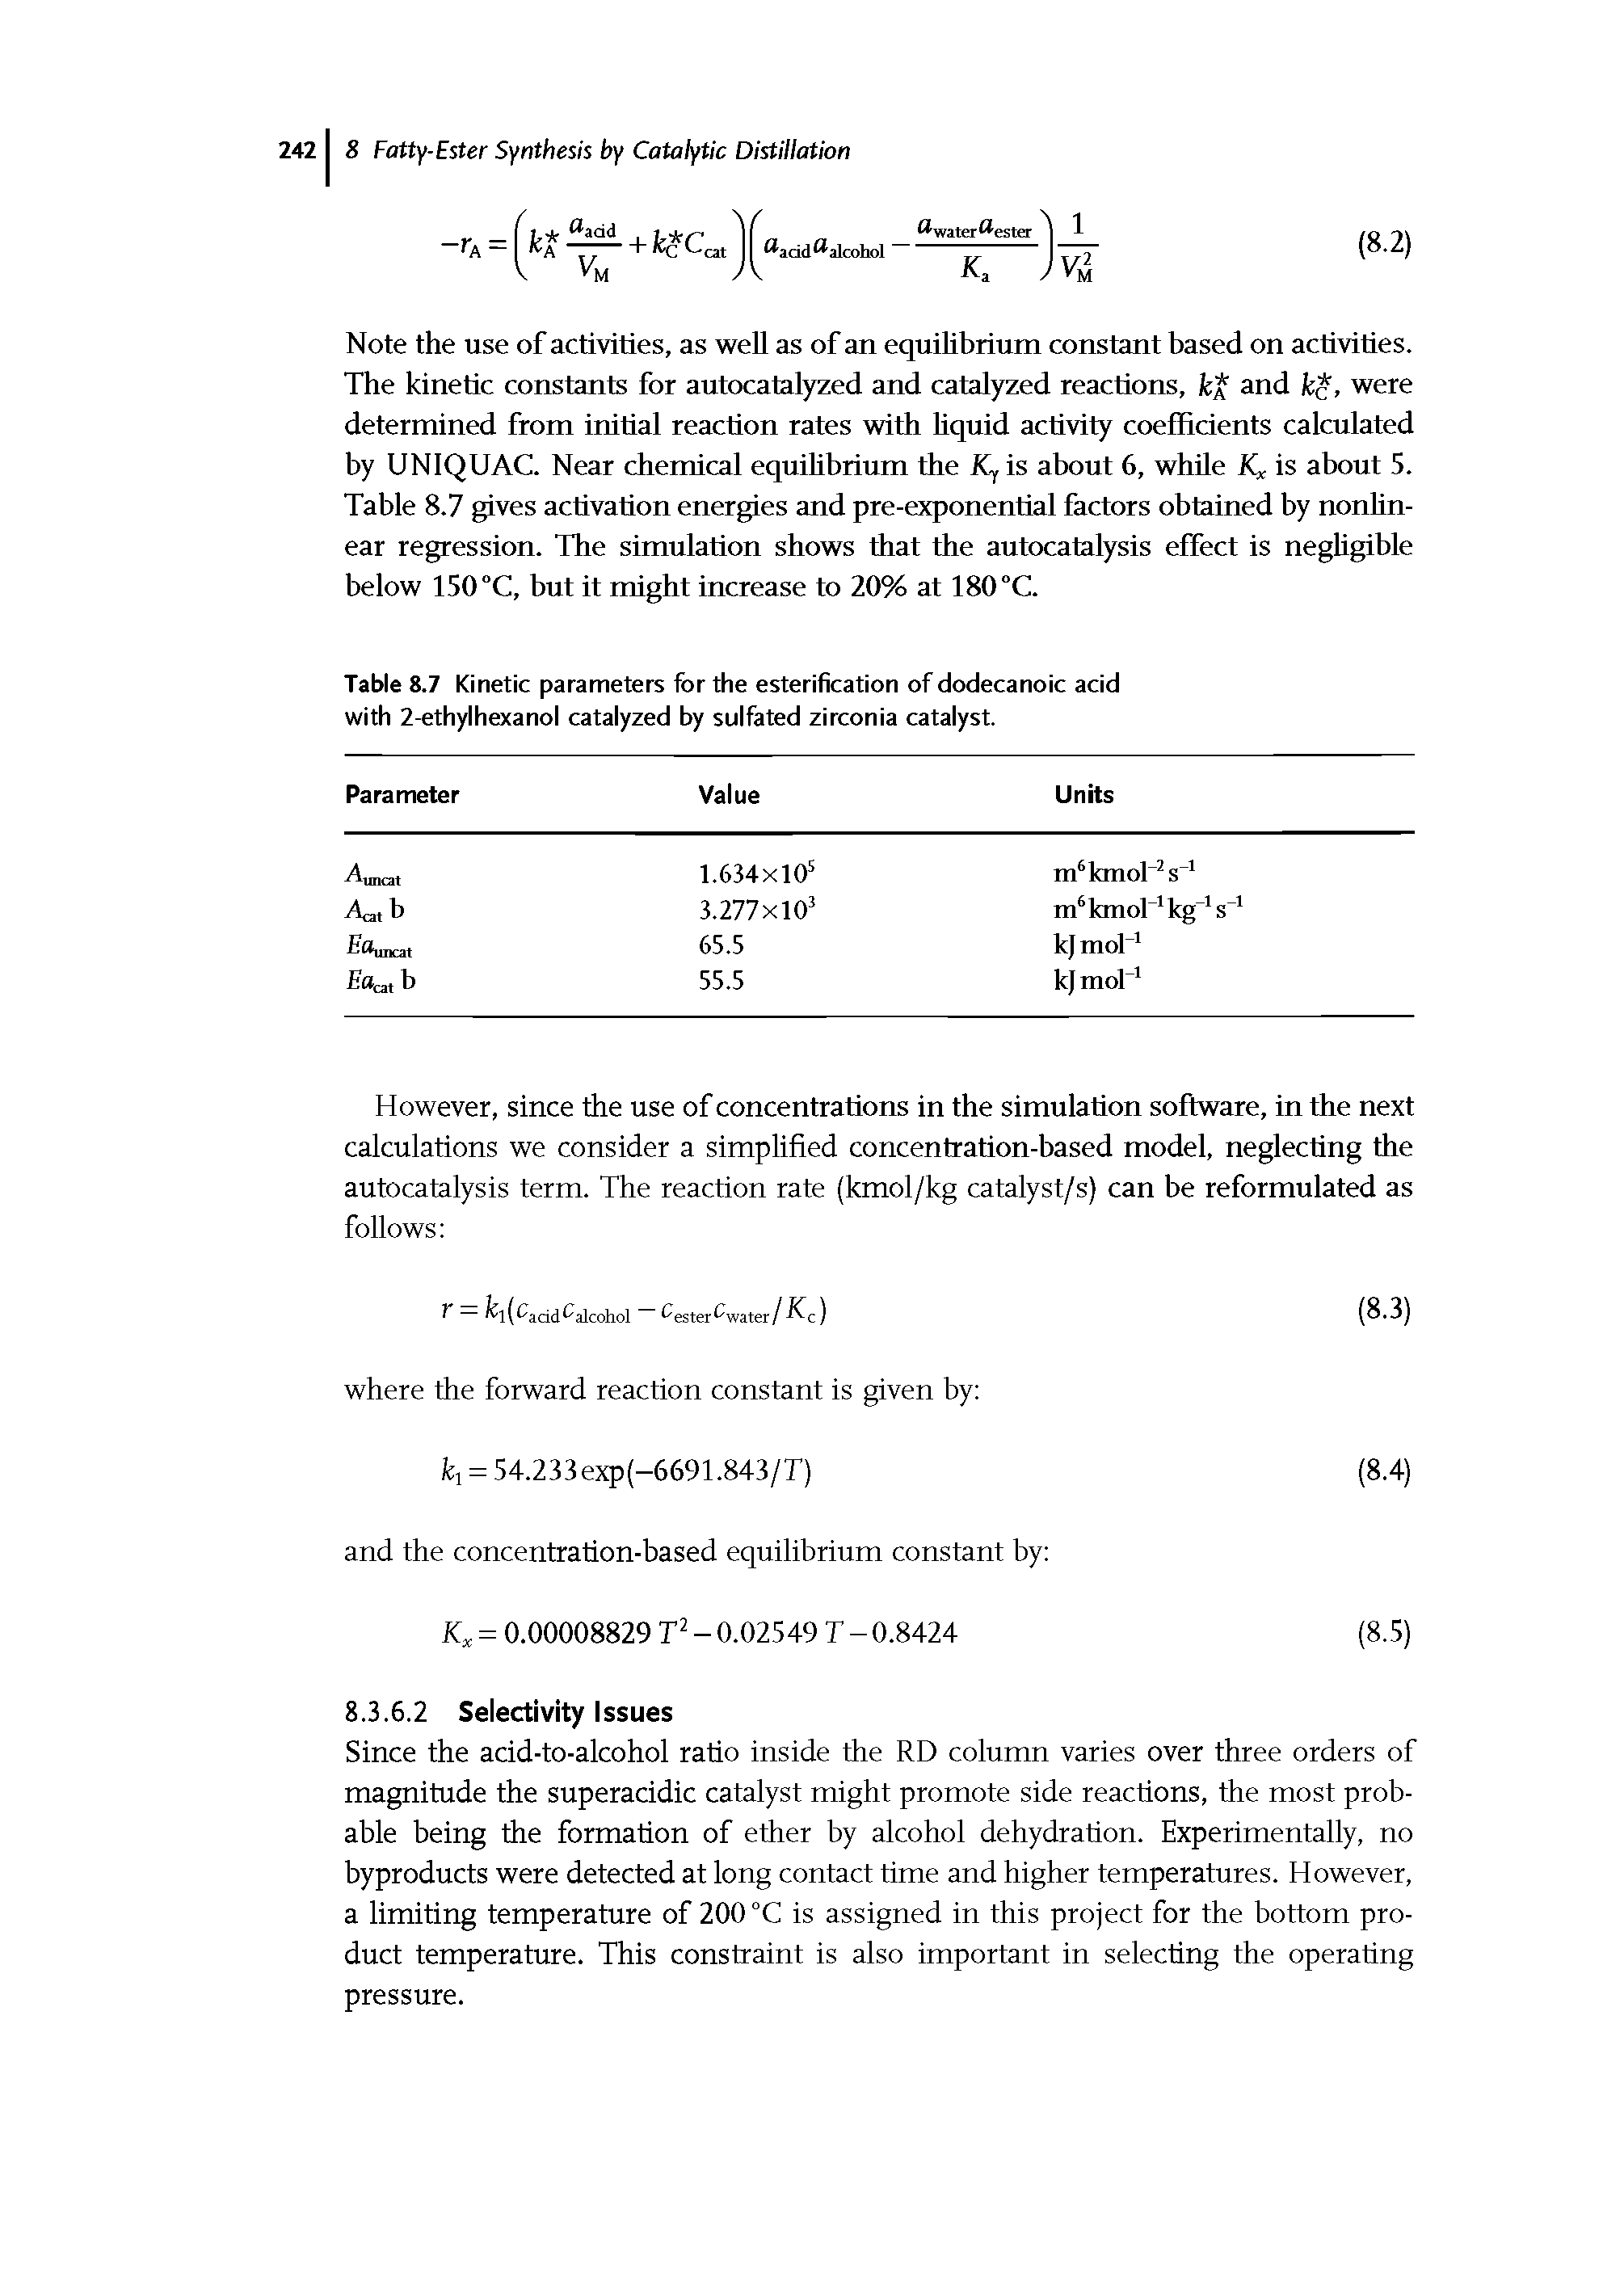 Table 8.7 Kinetic parameters for the esterification of dodecanoic acid with 2-ethylhexanol catalyzed by sulfated zirconia catalyst.